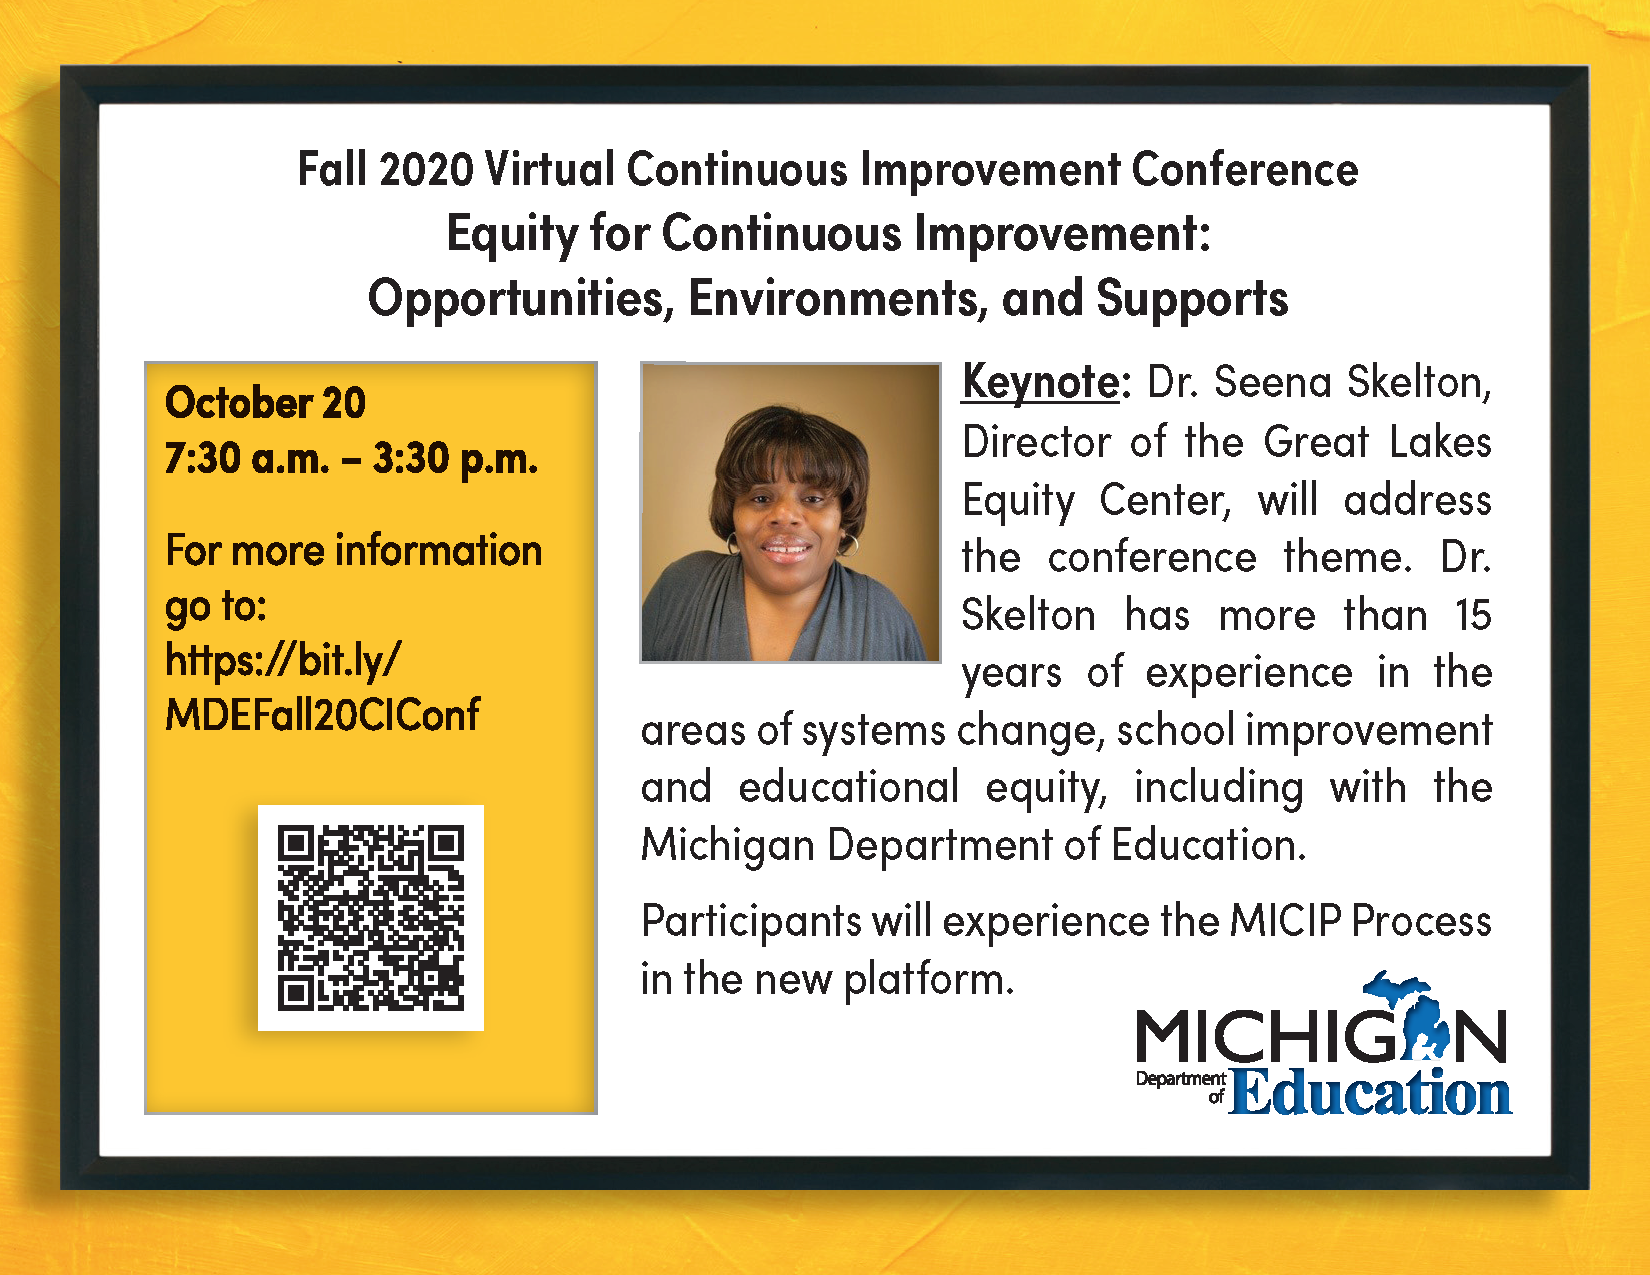 Fall Continuous Improvement Conference